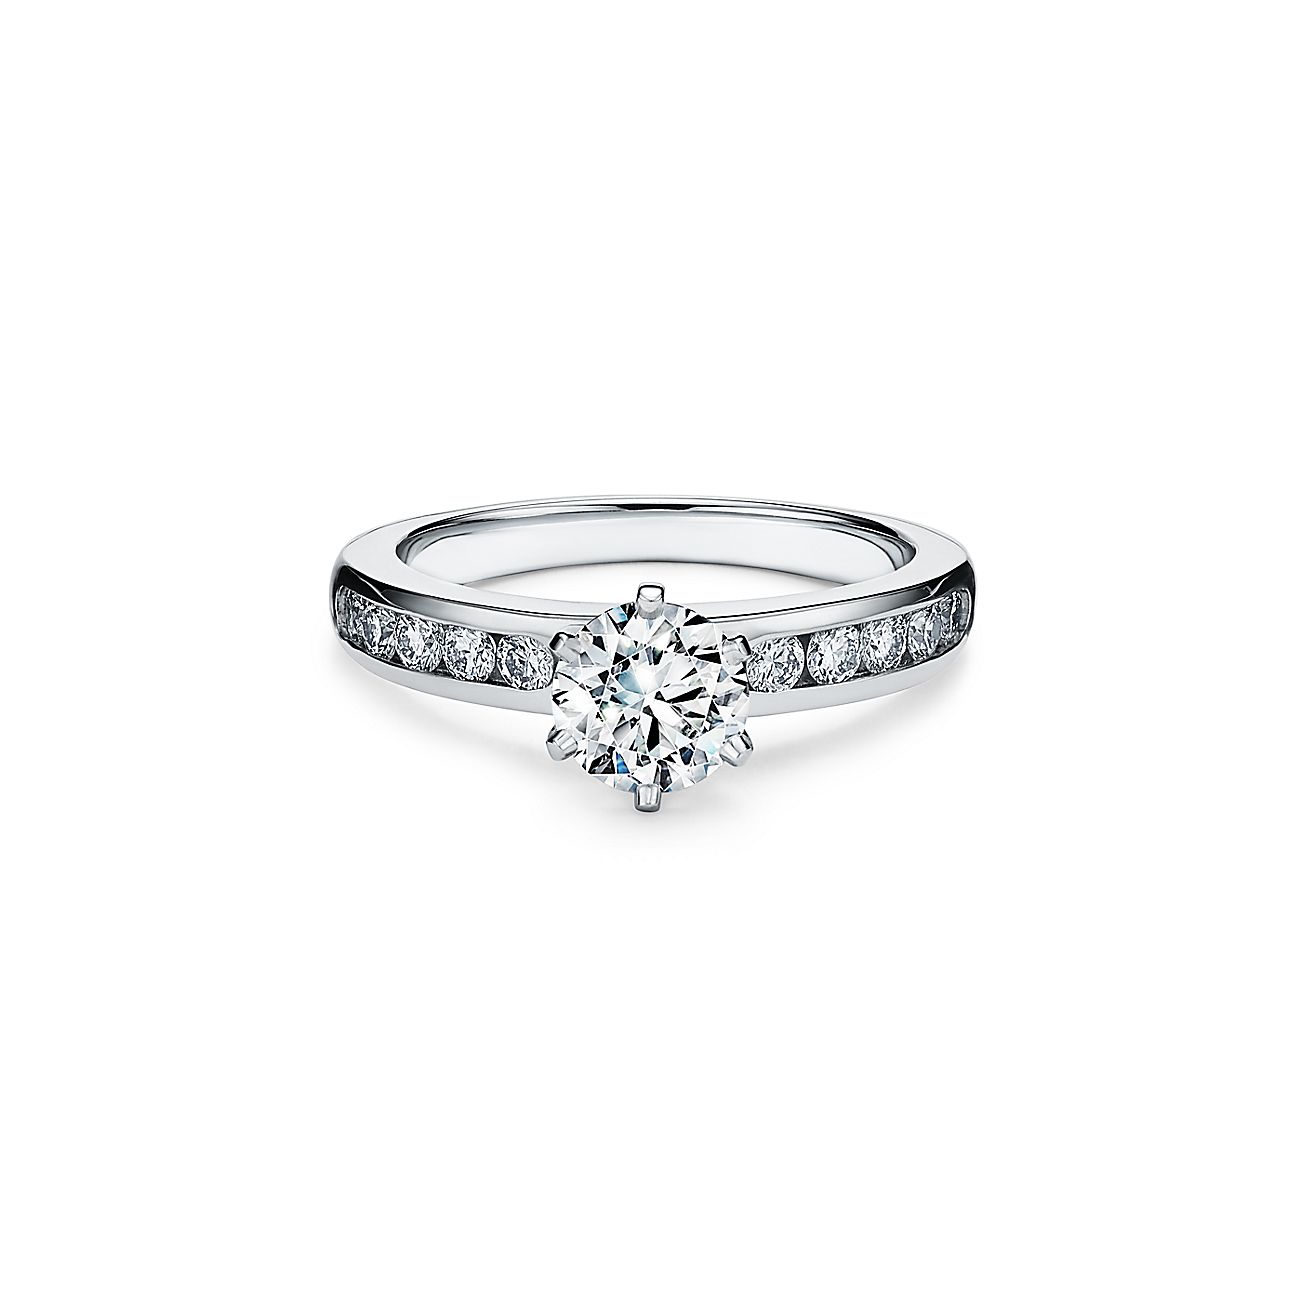 Tiffany & Co. - Round 1.34 TCW Channel Set Band Engagement Ring American Diamond